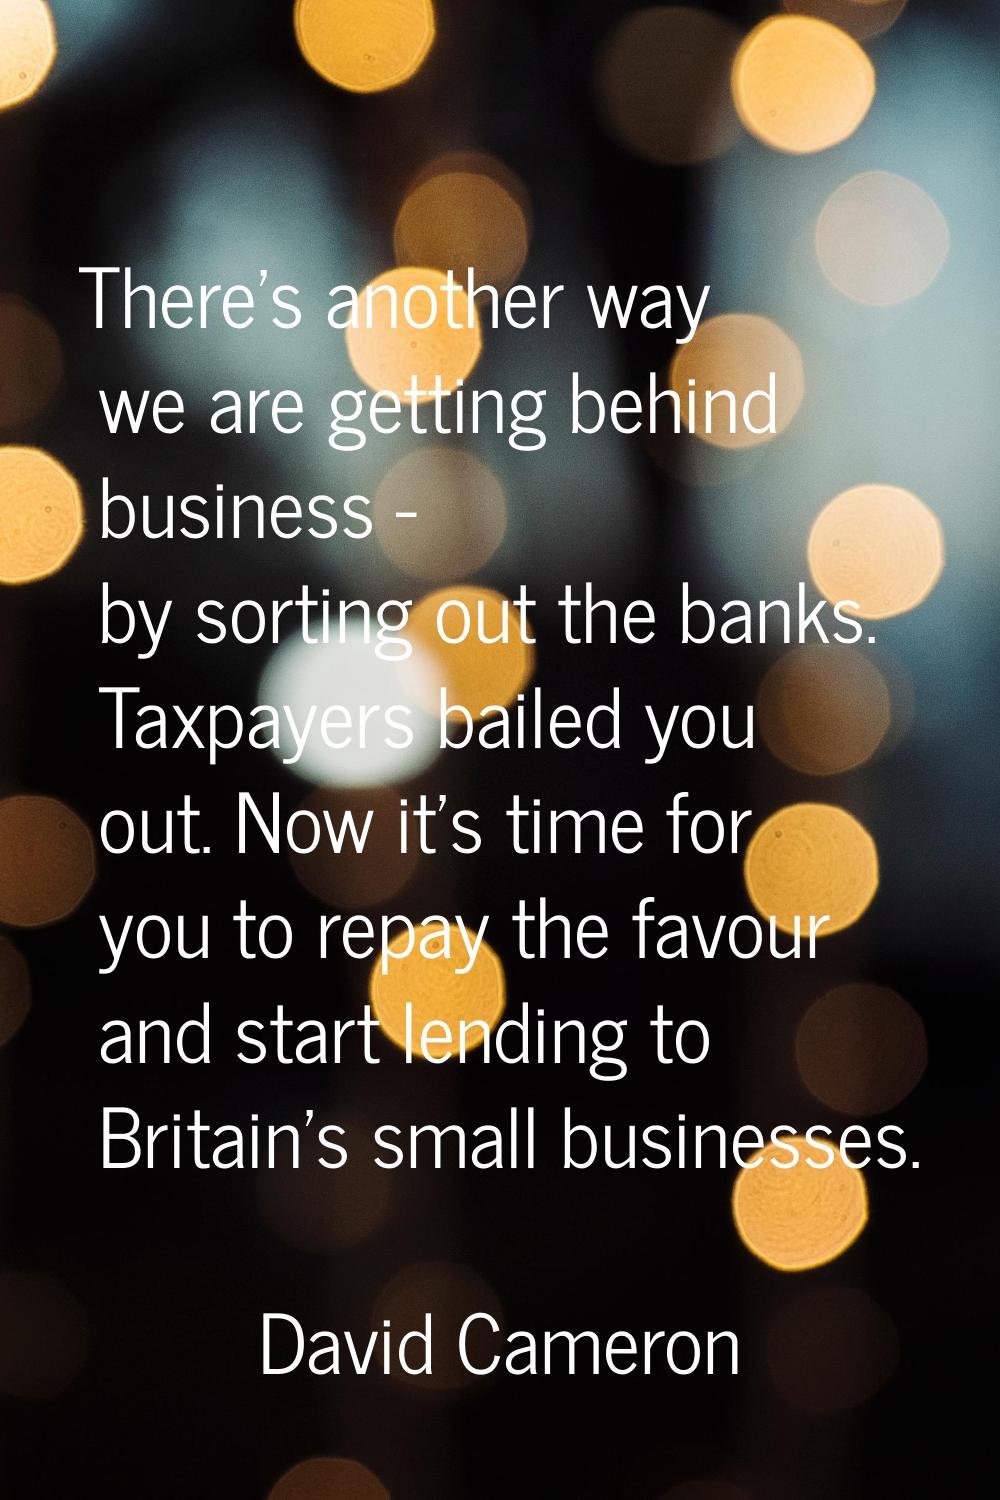 There's another way we are getting behind business - by sorting out the banks. Taxpayers bailed you